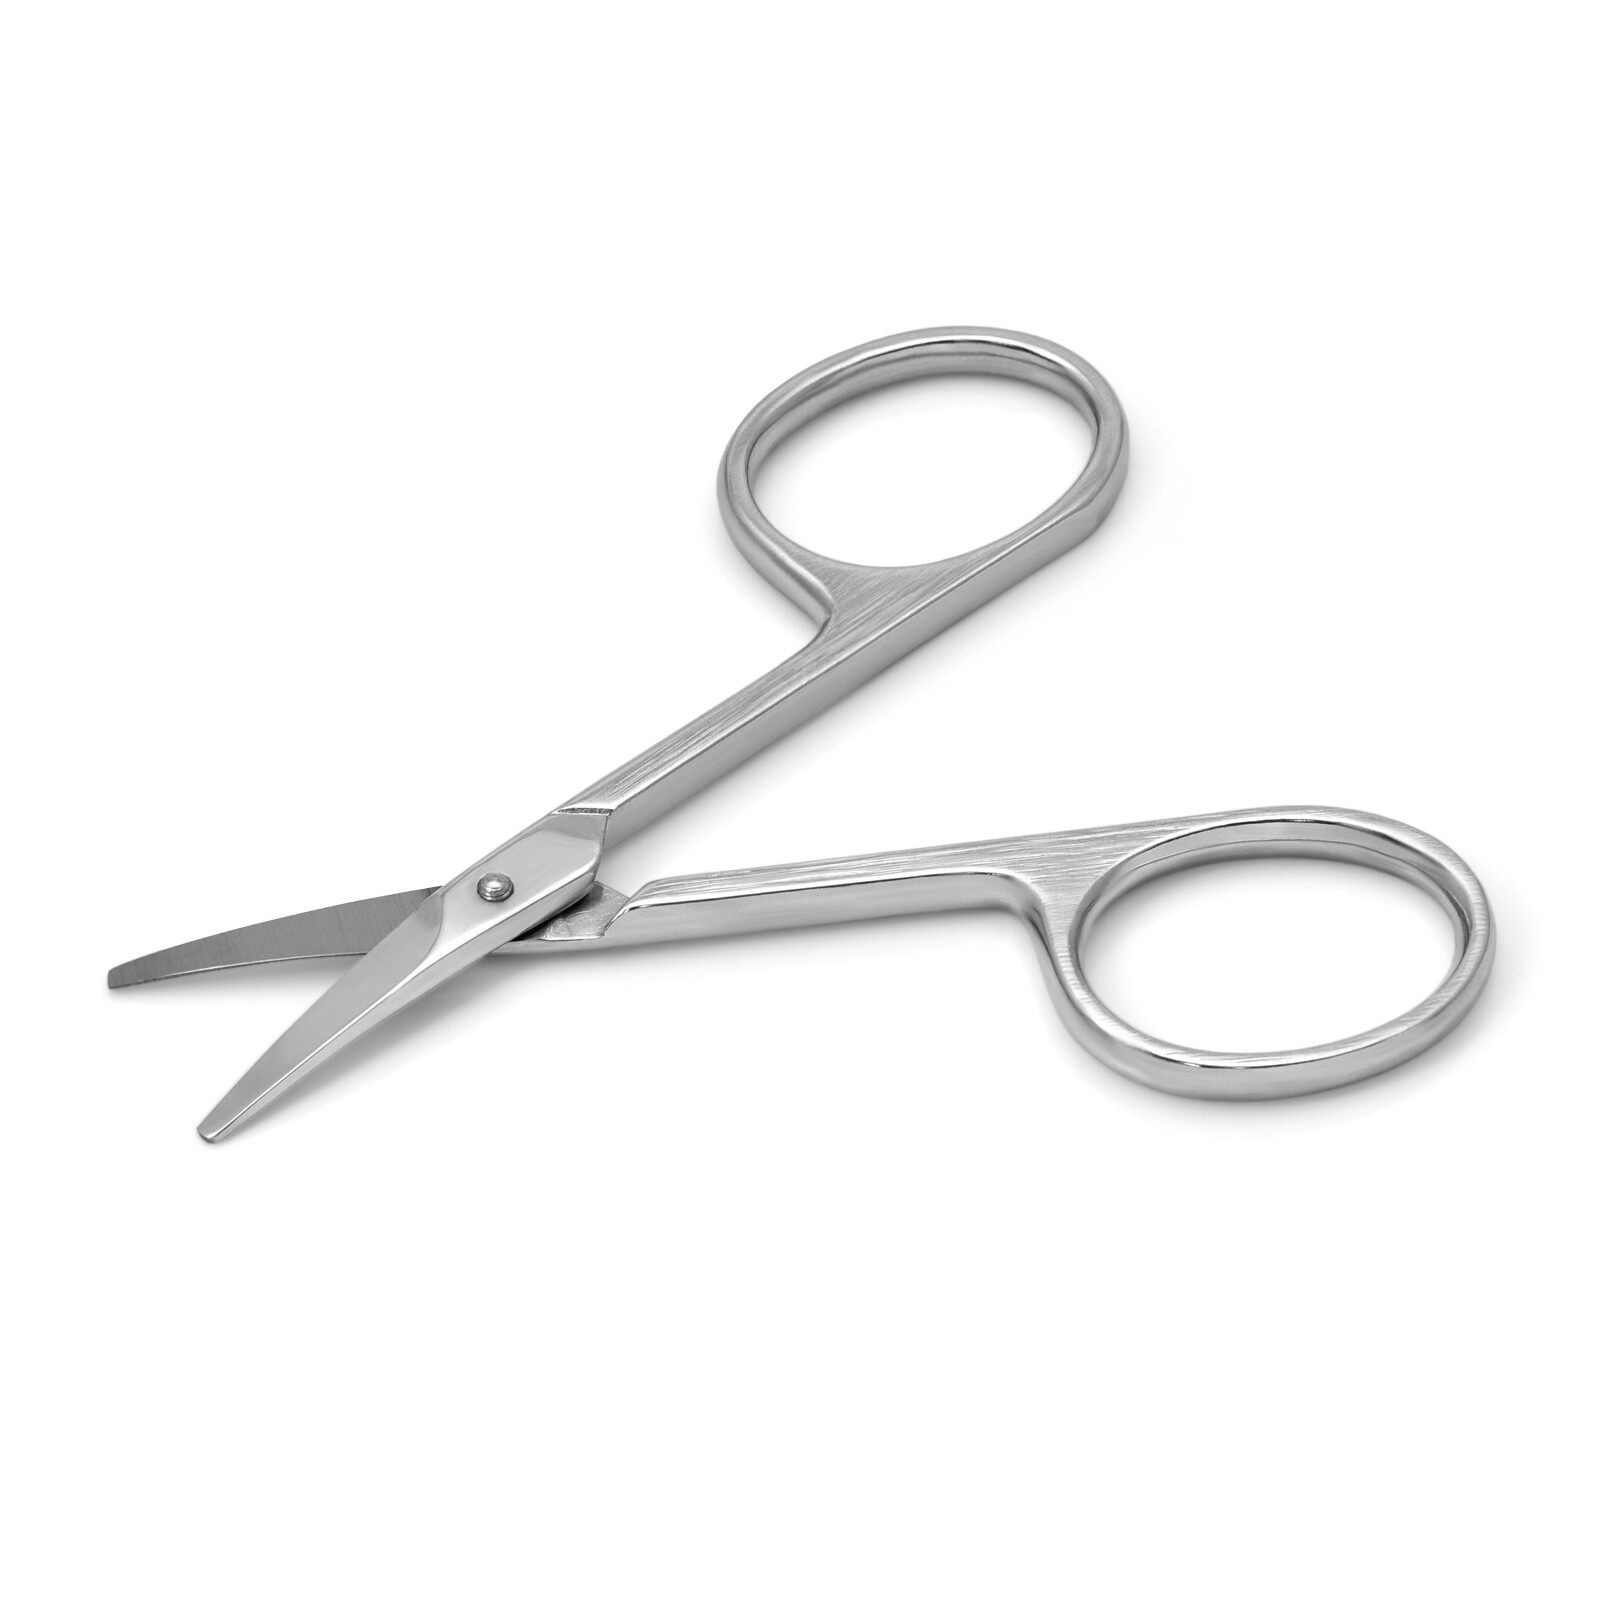 Hans Kniebes Baby Nail Scissors, Stainless Steel, made in Solingen ...